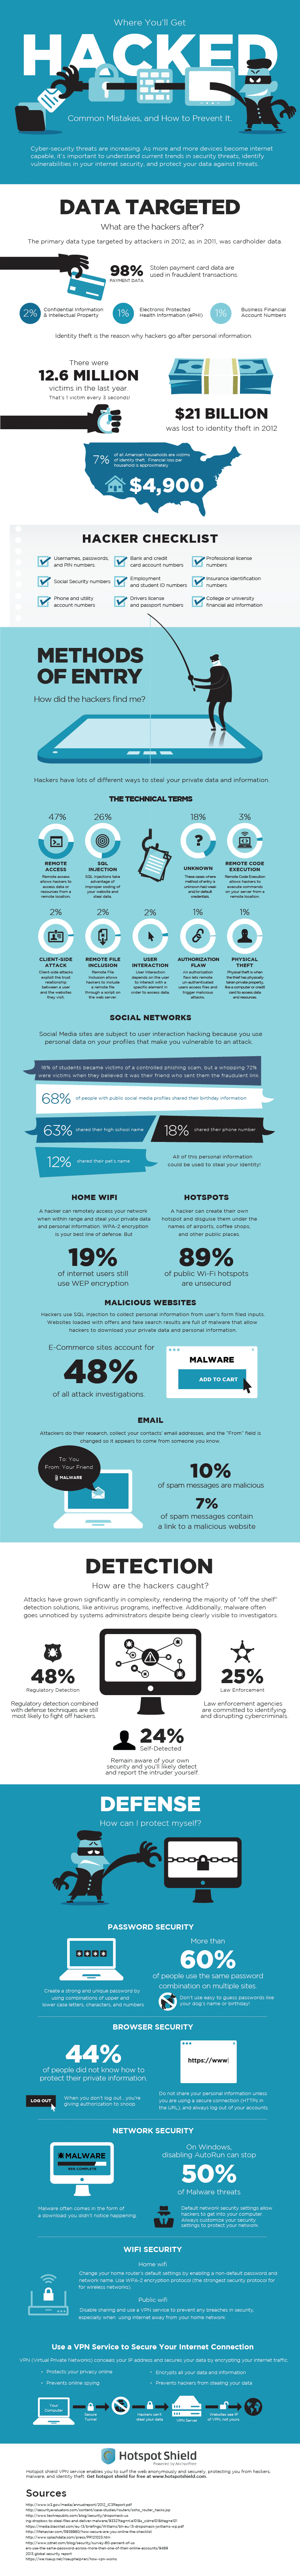 How To Hacker-Proof Your Life [Infographic]